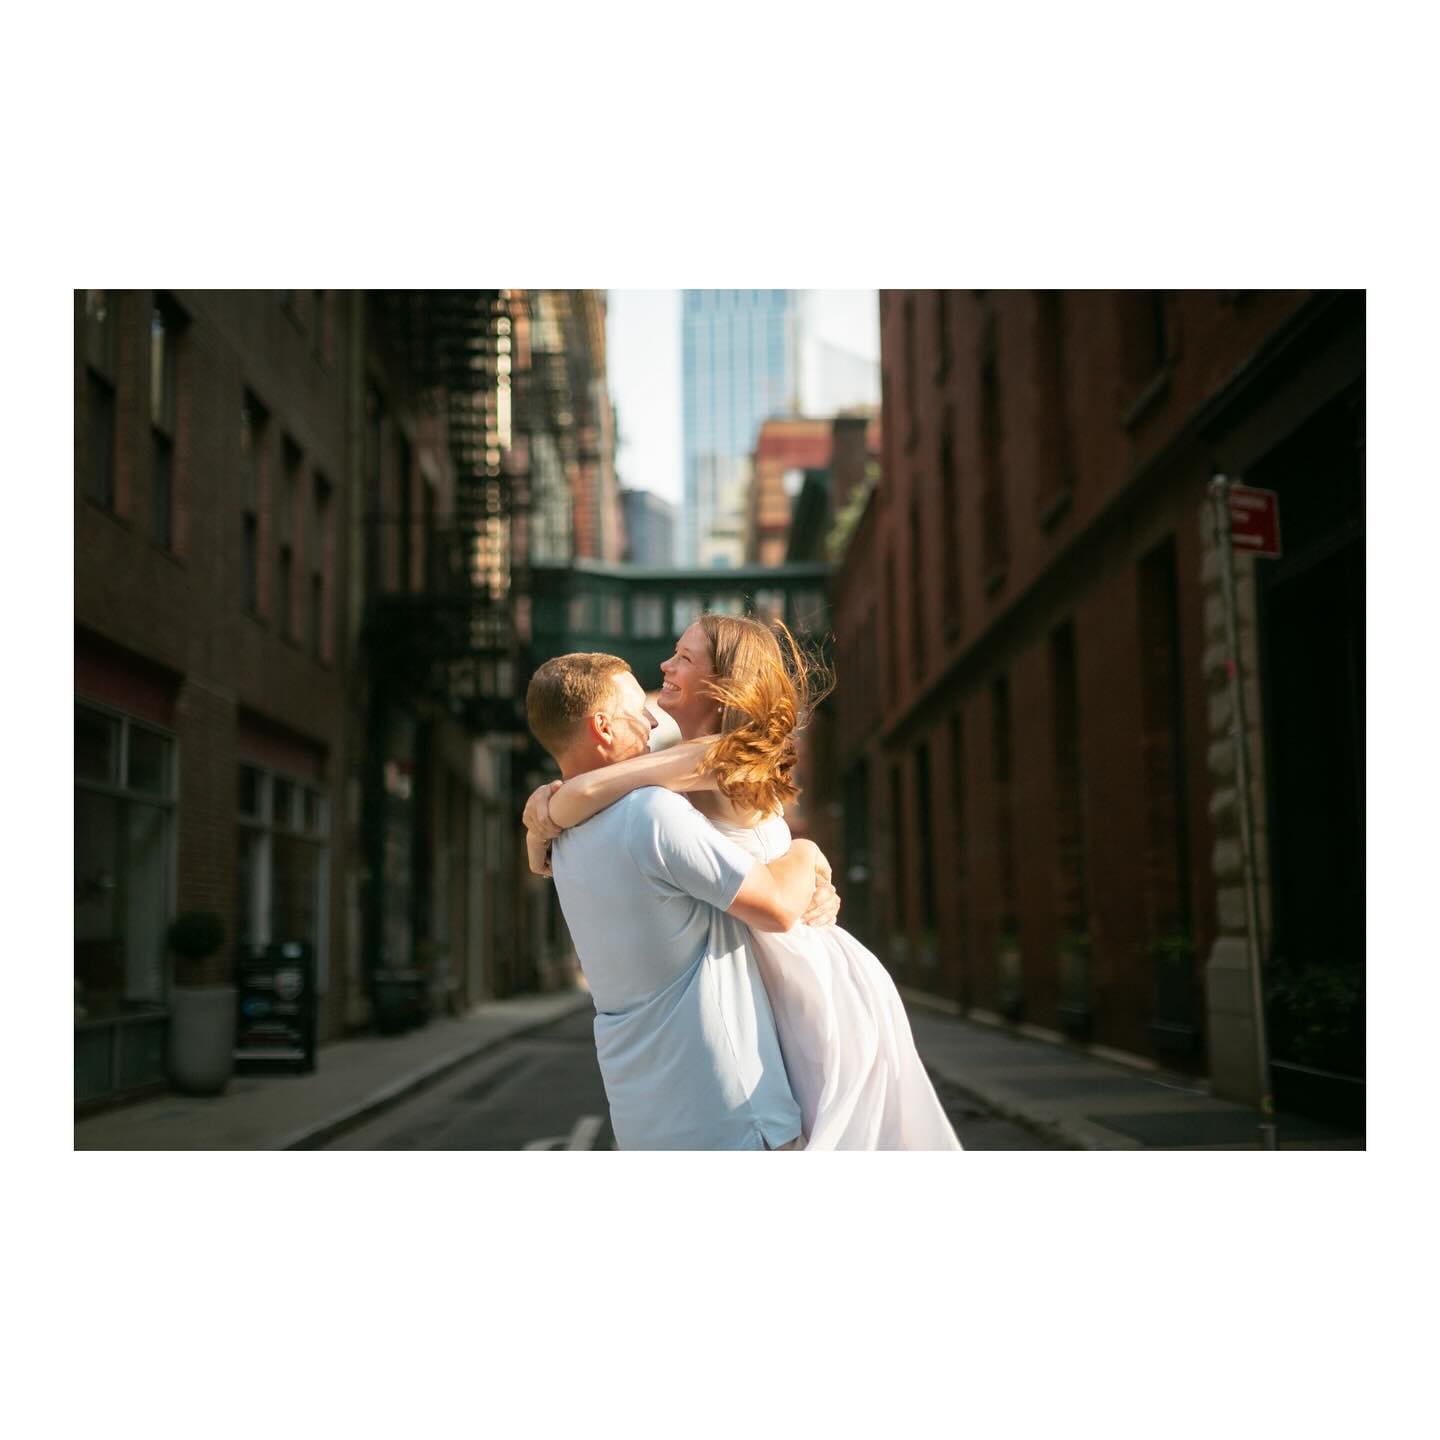 Our countdown begins. In just over a month, these two magnificent people are getting #married!

#summerwedding
#newyorkweddings
#newyorkweddingphotographer
#hamptonswedding 
#newyorkcityweddingphotographer
#citywedding #cityelopement #weddings2024 #m